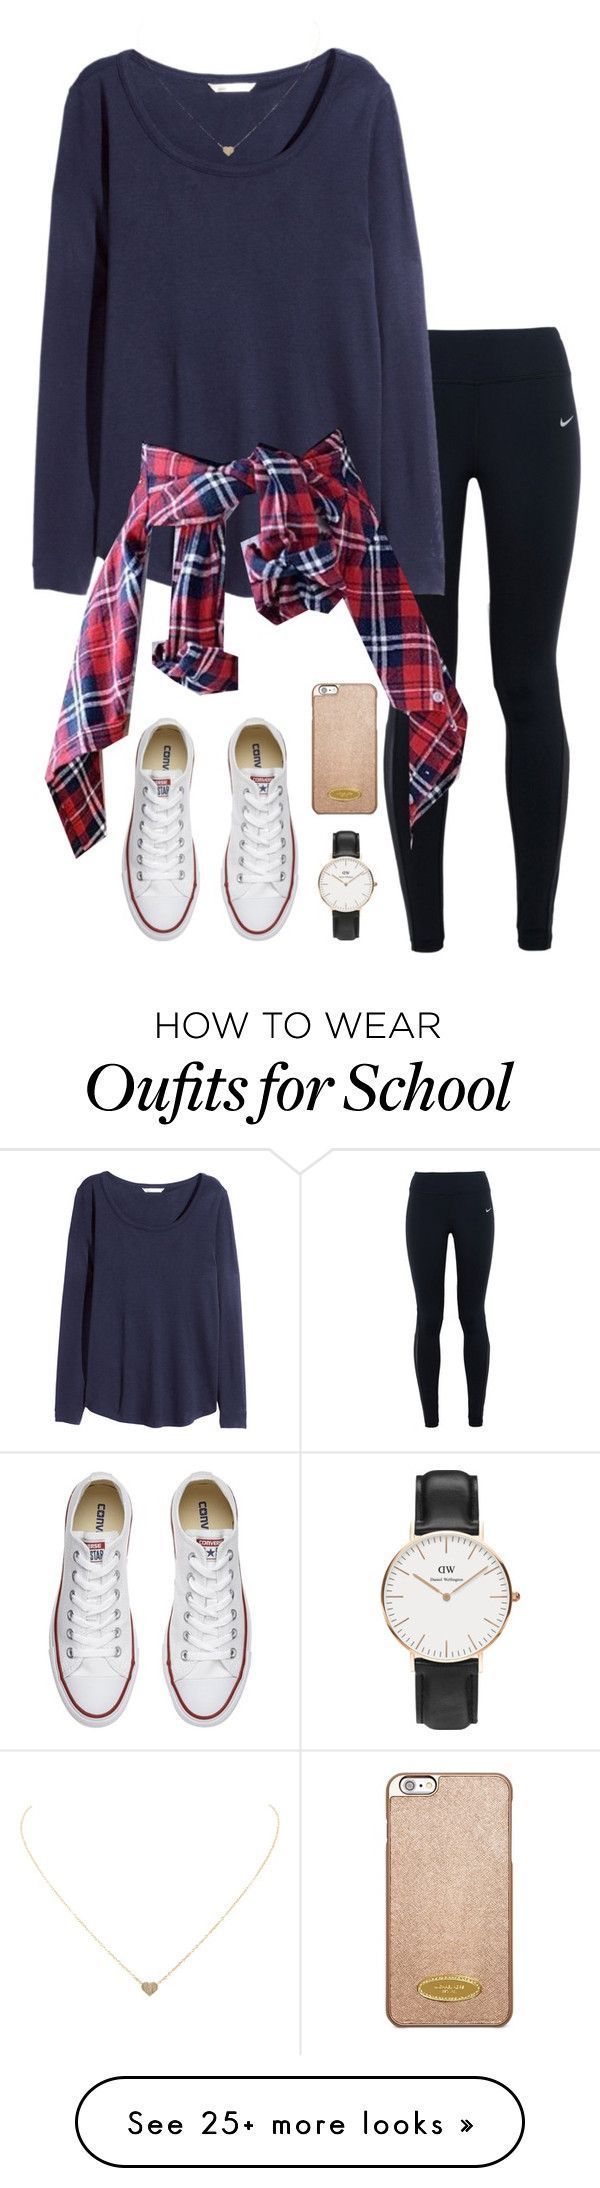 I couldn’t do the leggings but maybe black jeans- “School today” by ksarak o…